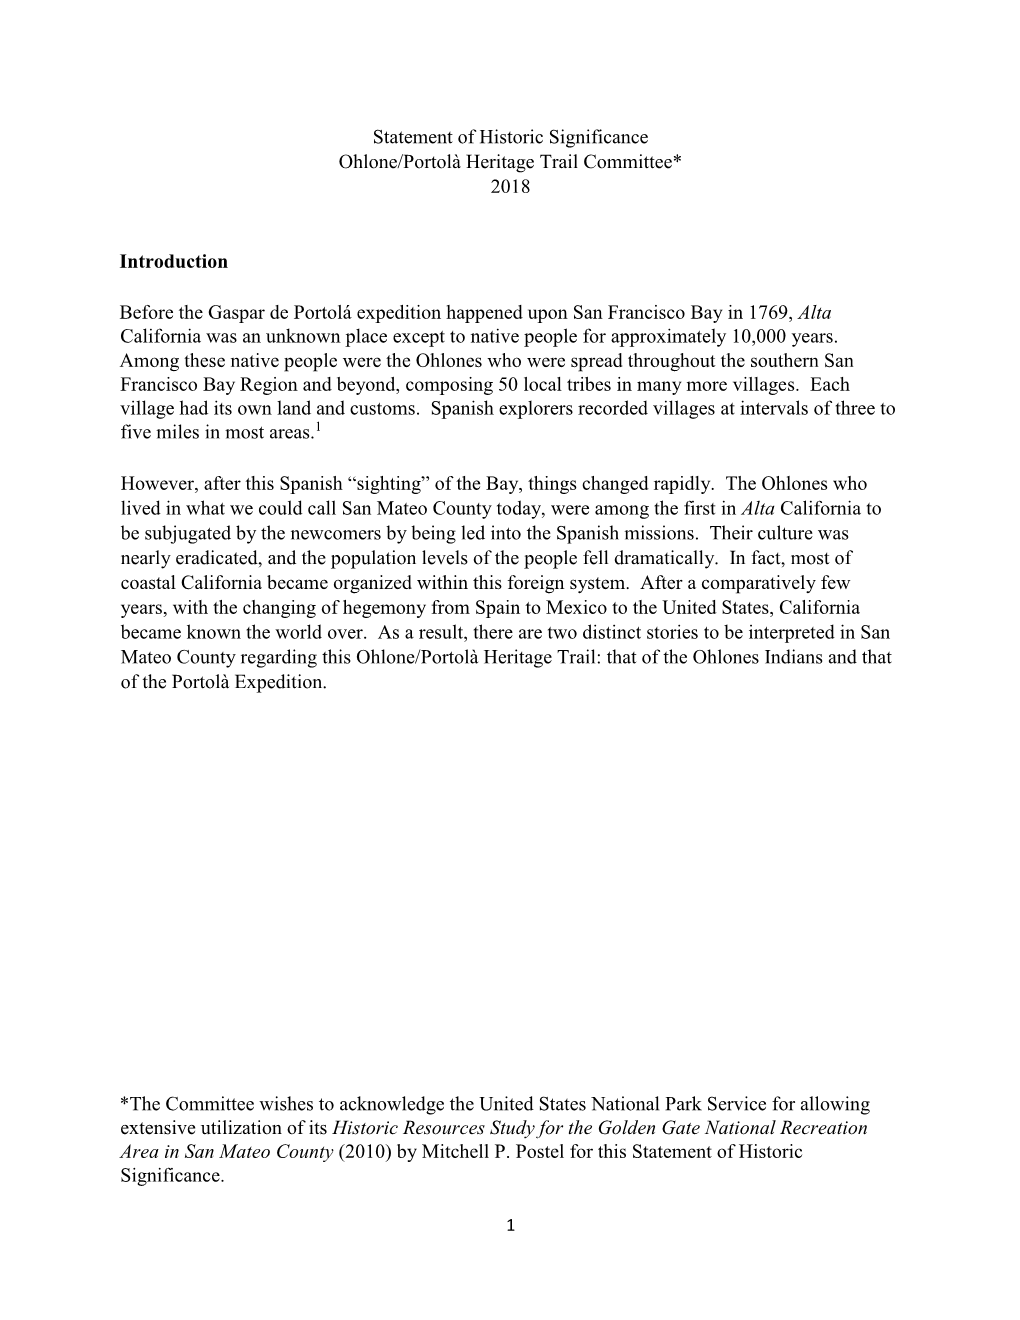 Statement of Historic Significance Ohlone/Portolà Heritage Trail Committee* 2018